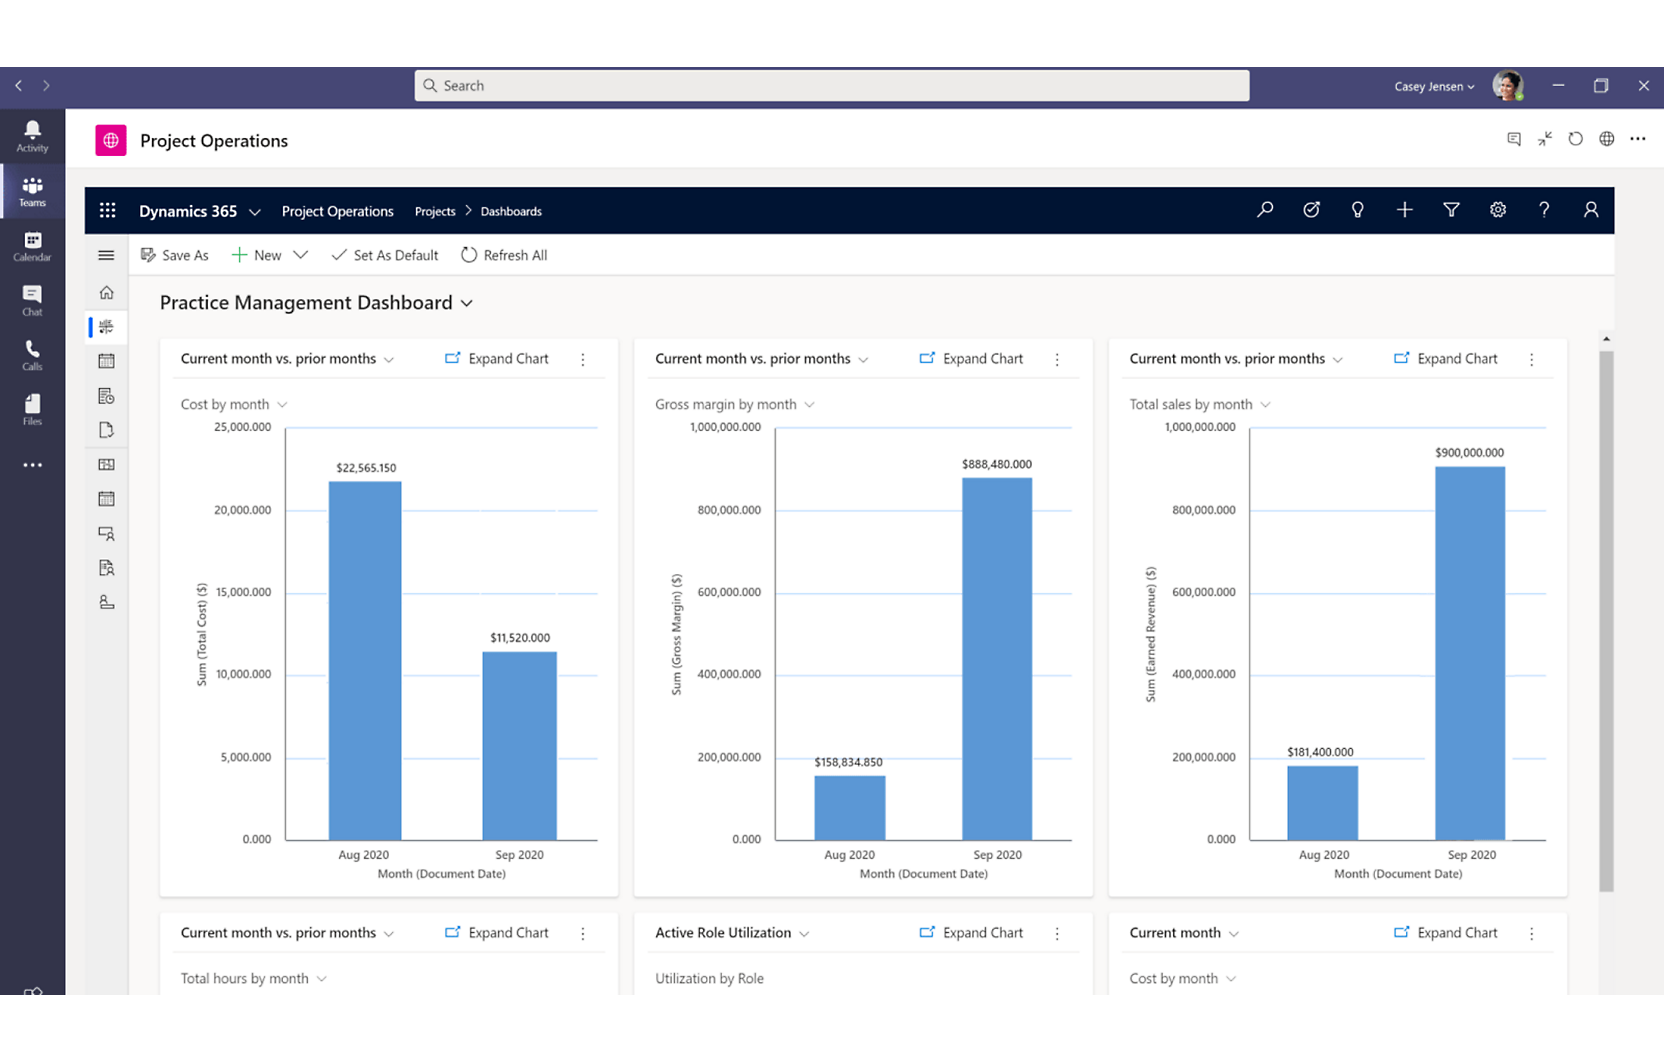 A screenshot of a project management dashboard with various graphs related to financial metrics and resource utilization.